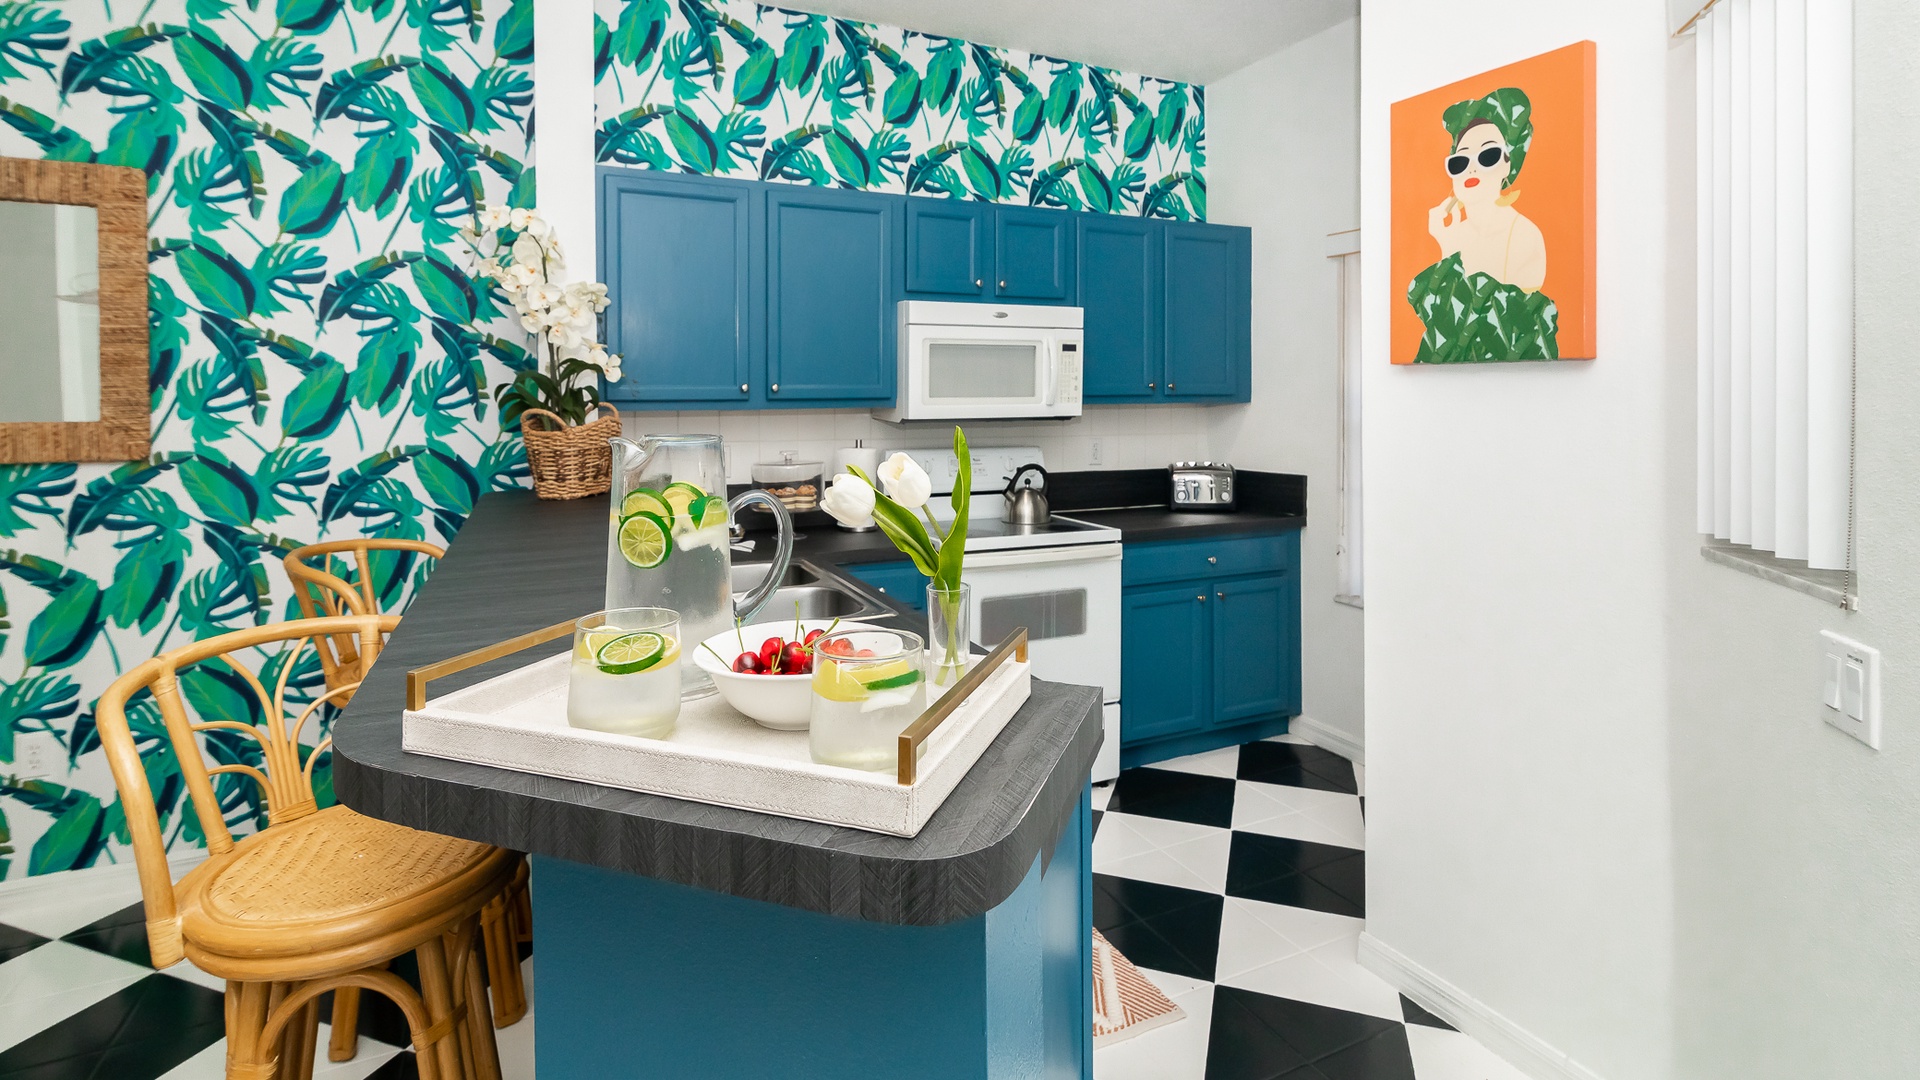 Kitchen boasts with colorful décor